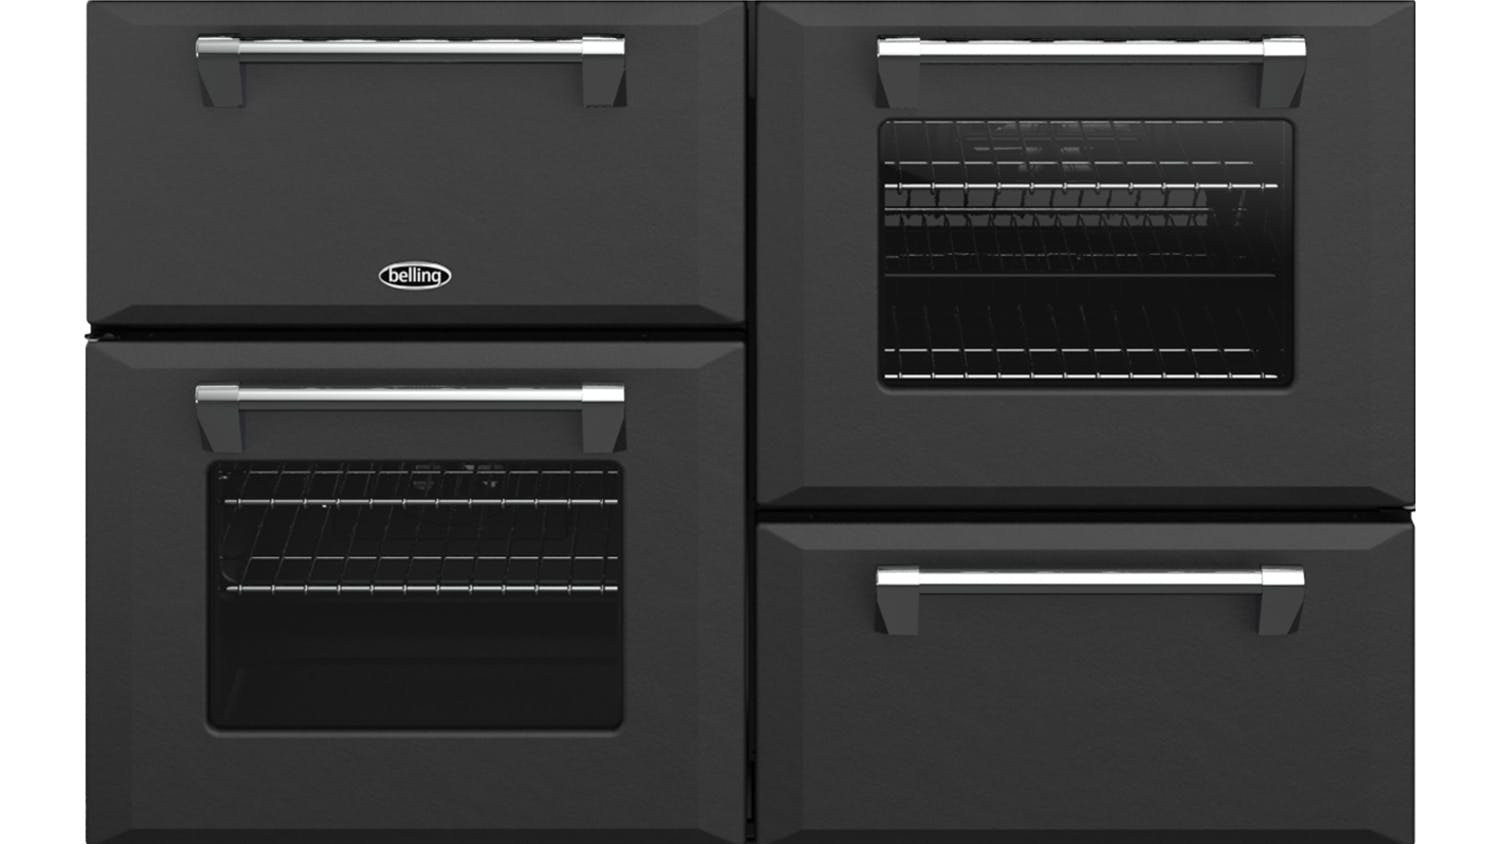 Belling 110cm Freestanding Oven with Induction Cooktop - Graphite (Colour Boutique/BRD1100IGR)